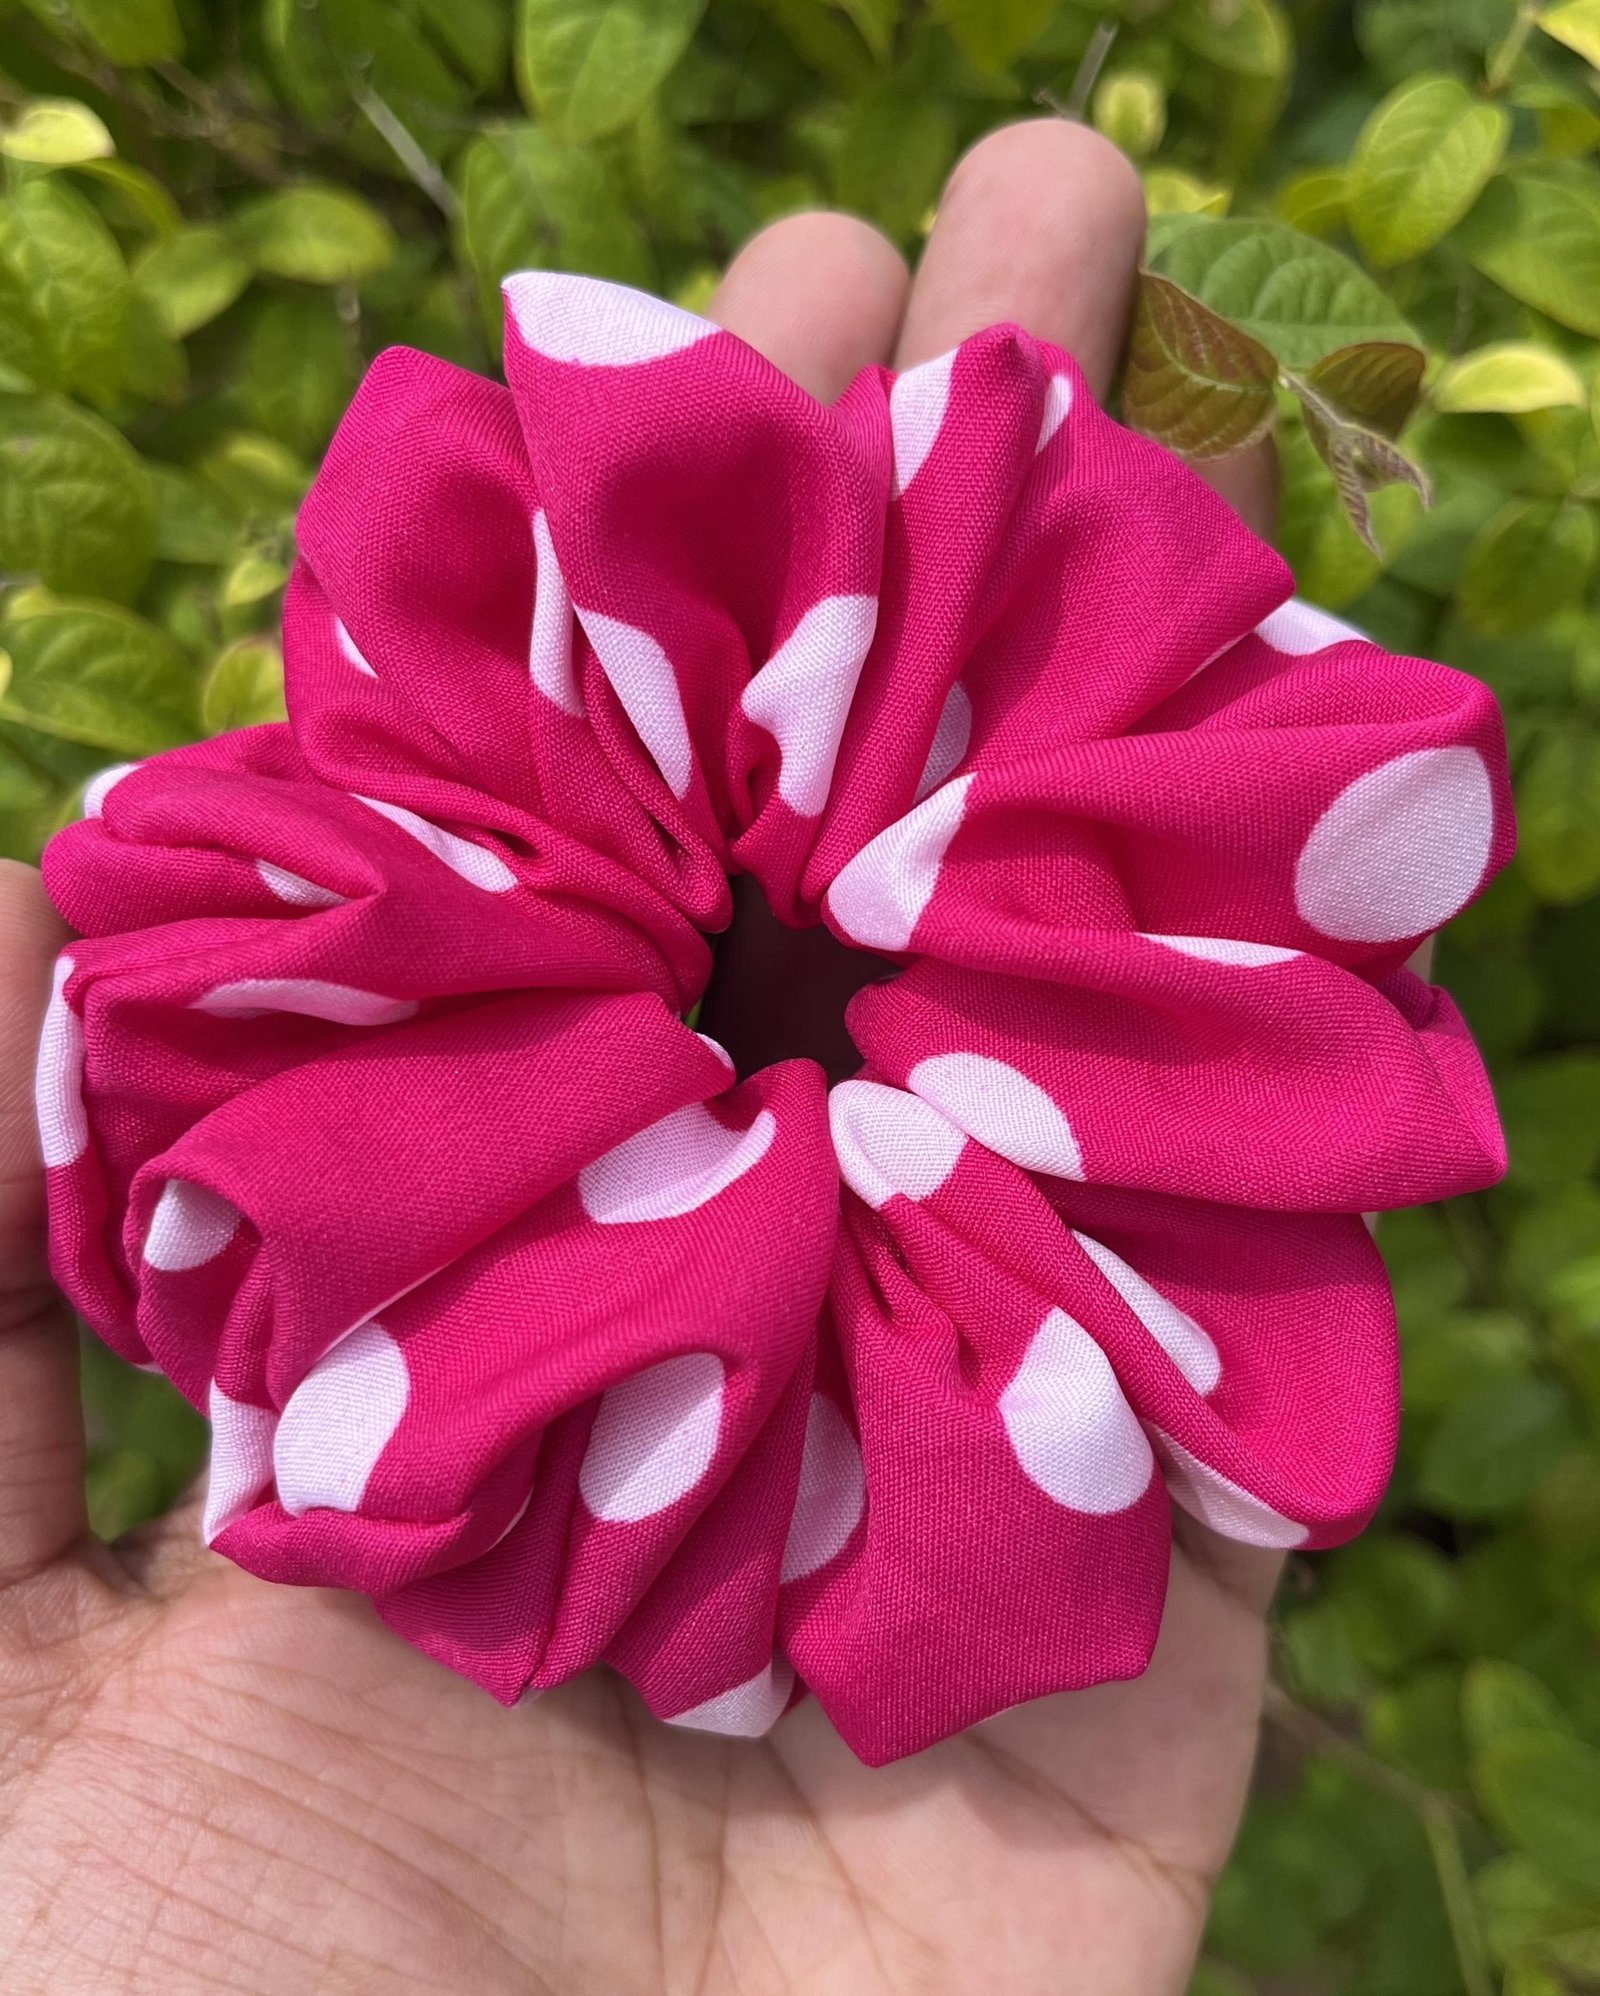 Stylish Pink Peppermint scrunchies with pastel tones, perfect for adding a soft and feminine touch to your hairstyles, complementing your spring fashion.